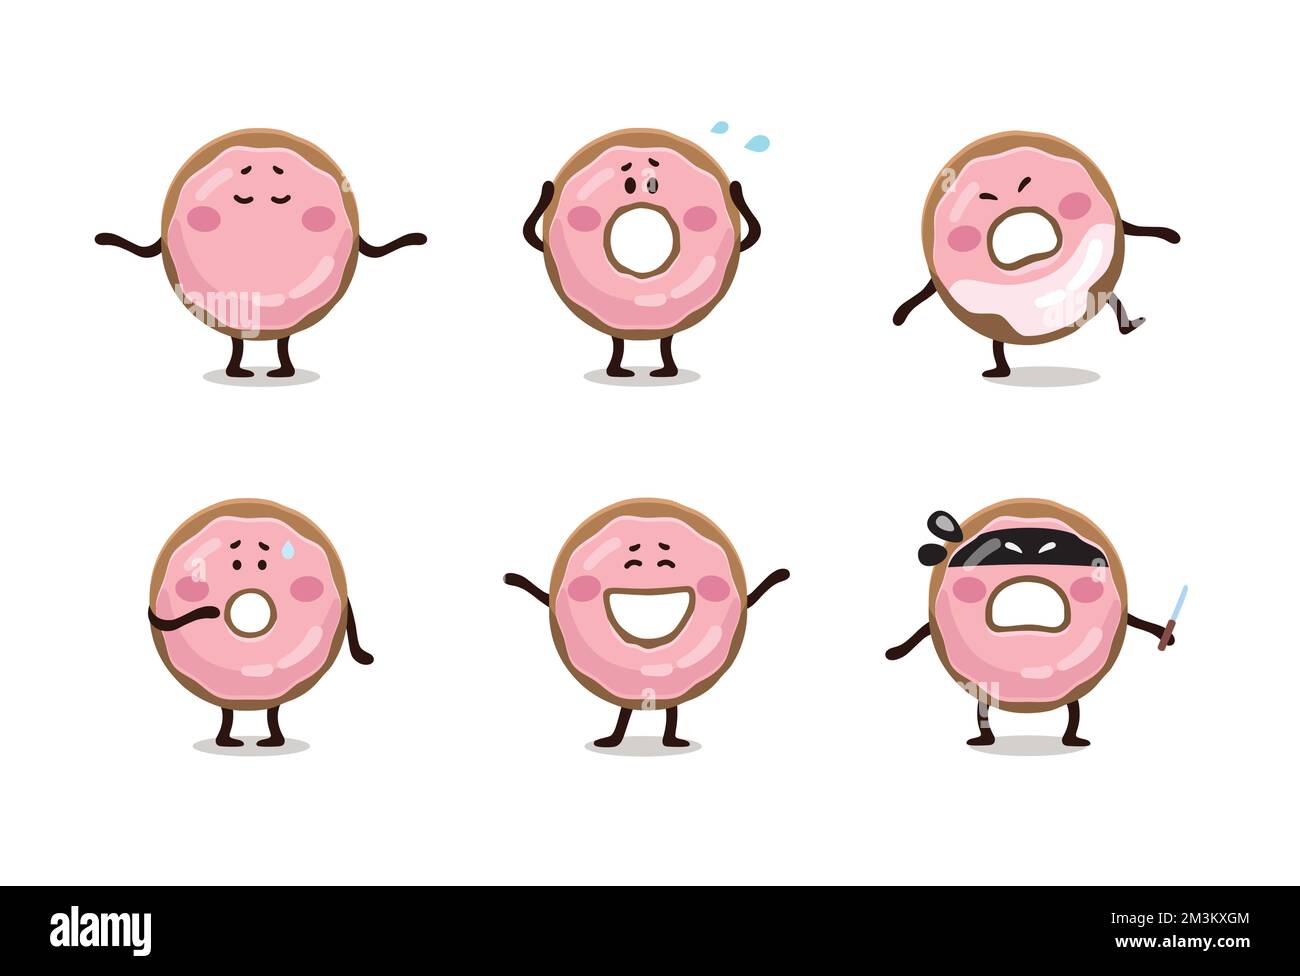 Funny flat simple kid's emoji stickers, characters, banner, muscots of pink glazed donuts. Emoji set. Cartoon characters. Stock Vector